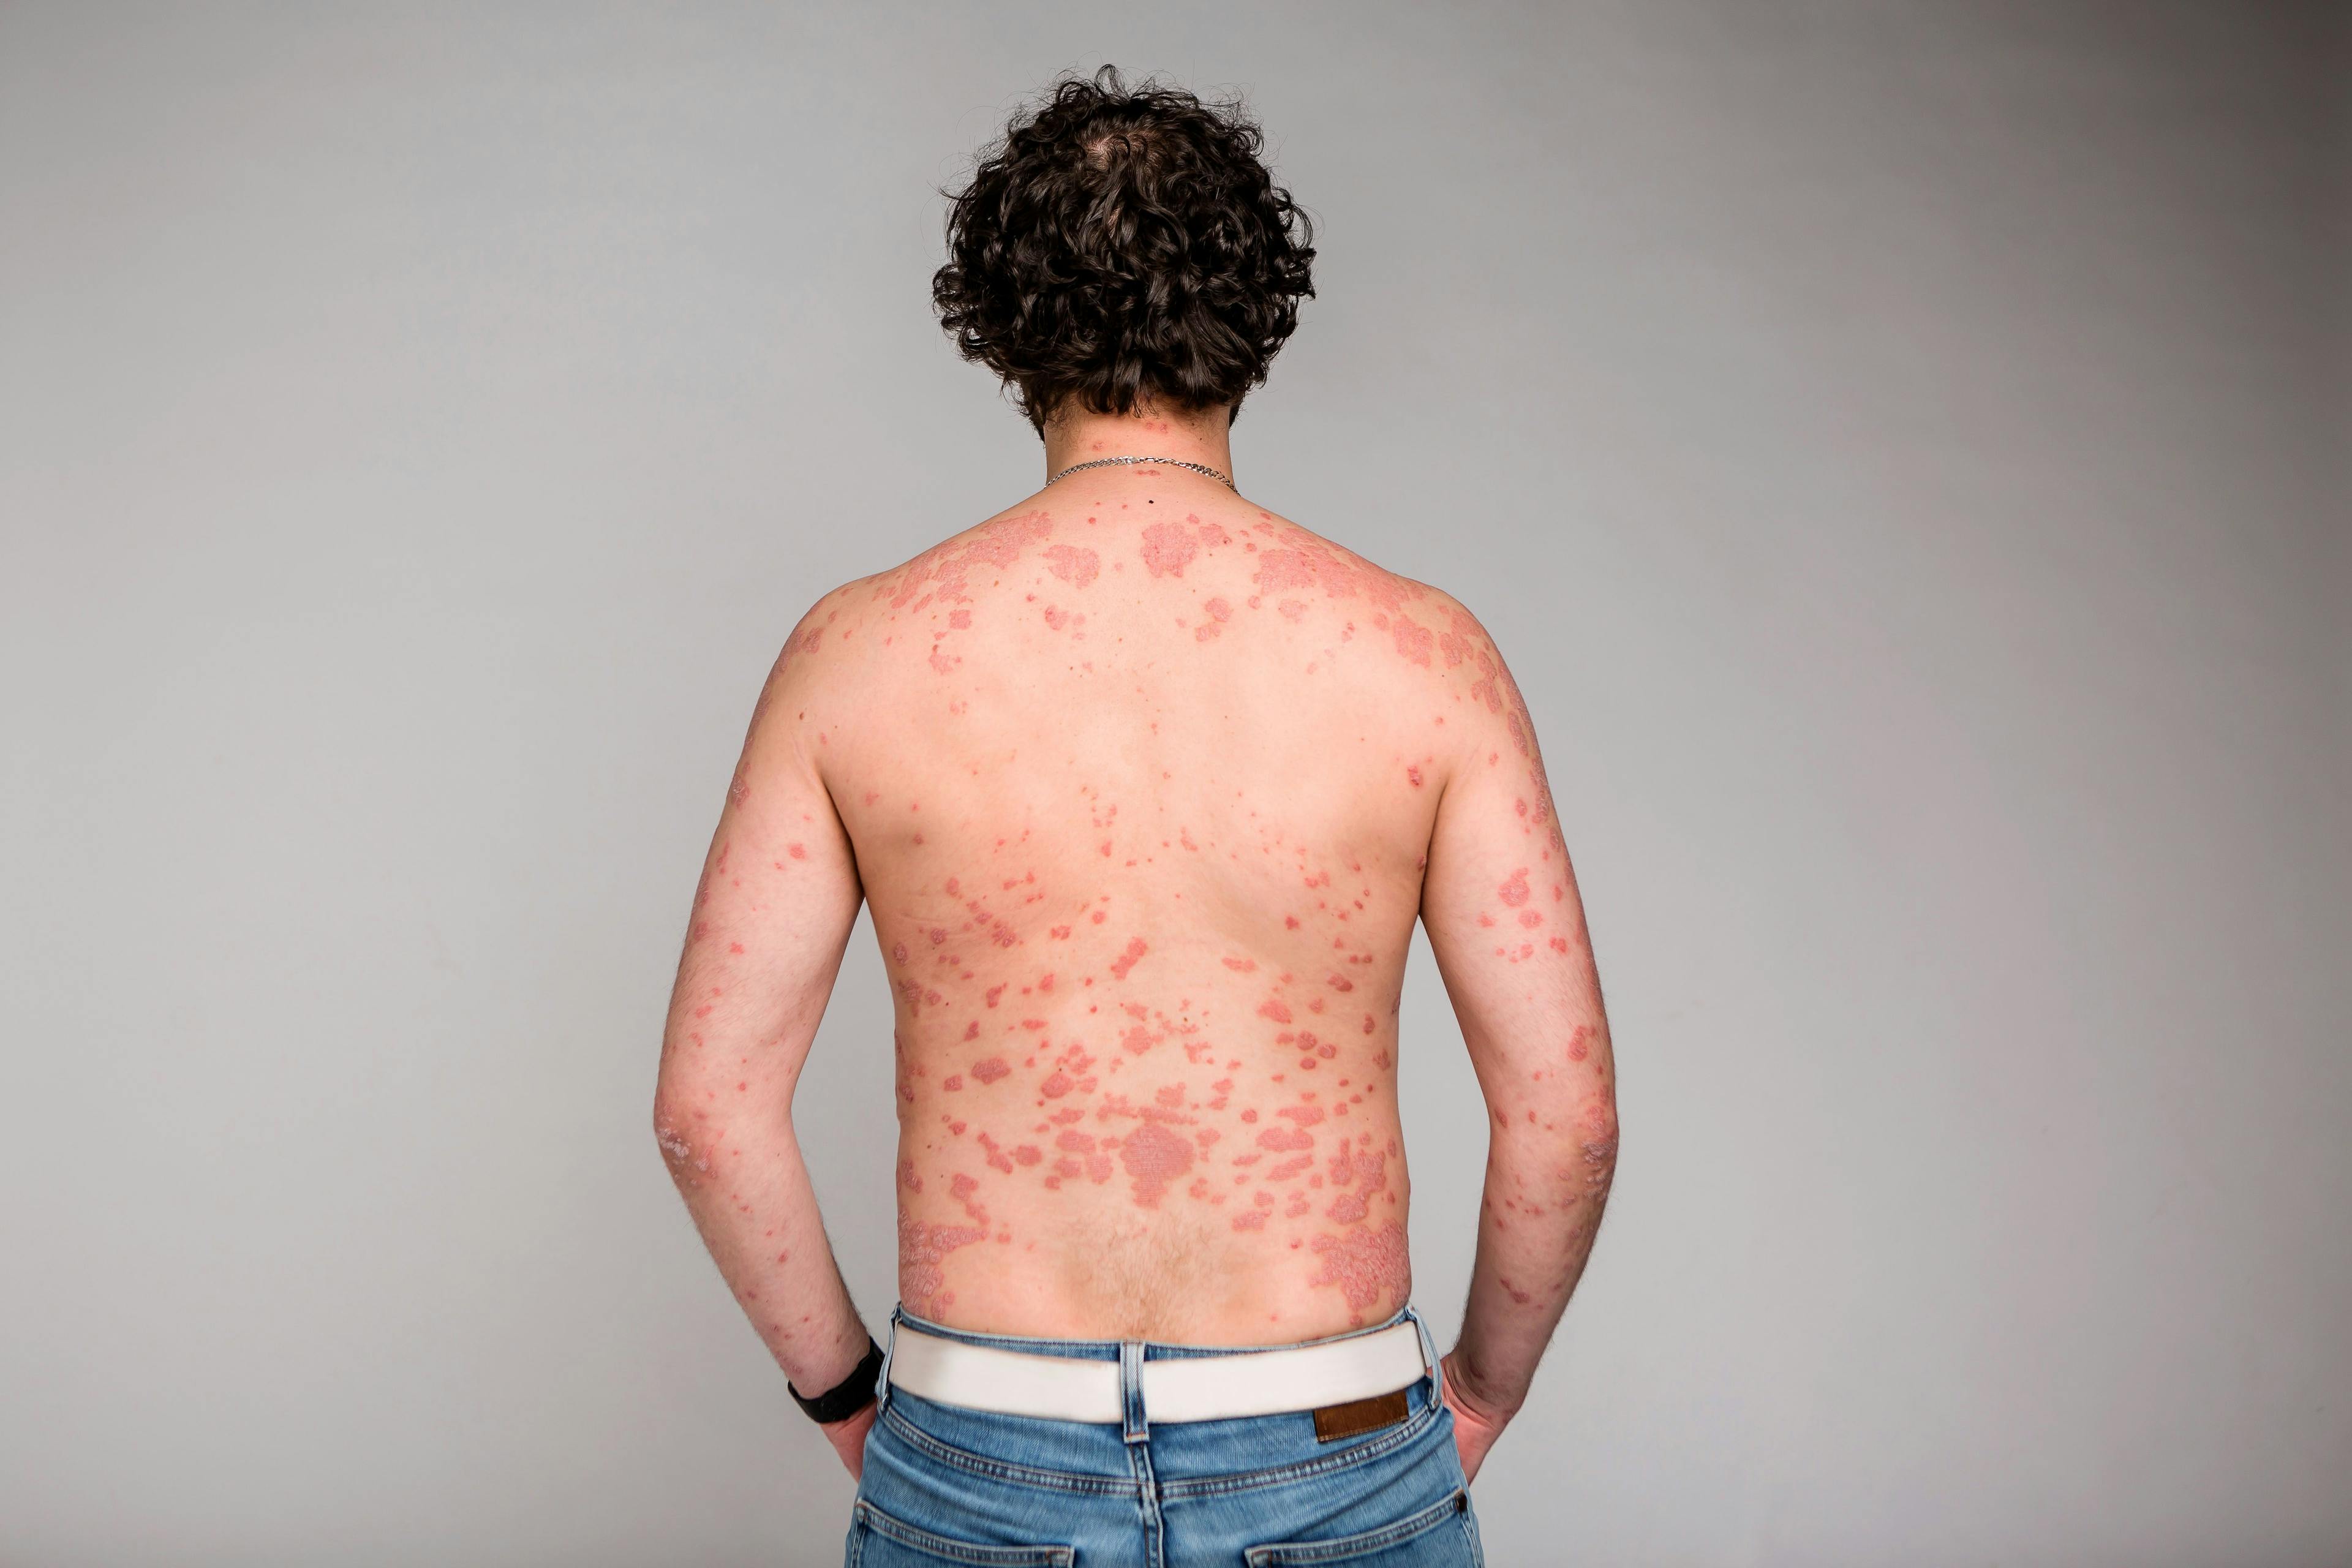 Psoriasis skin. Psoriasis is an autoimmune disease that affects the skin cause skin inflammation red and scaly | КРИСТИНА Игумнова - stock.adobe.com